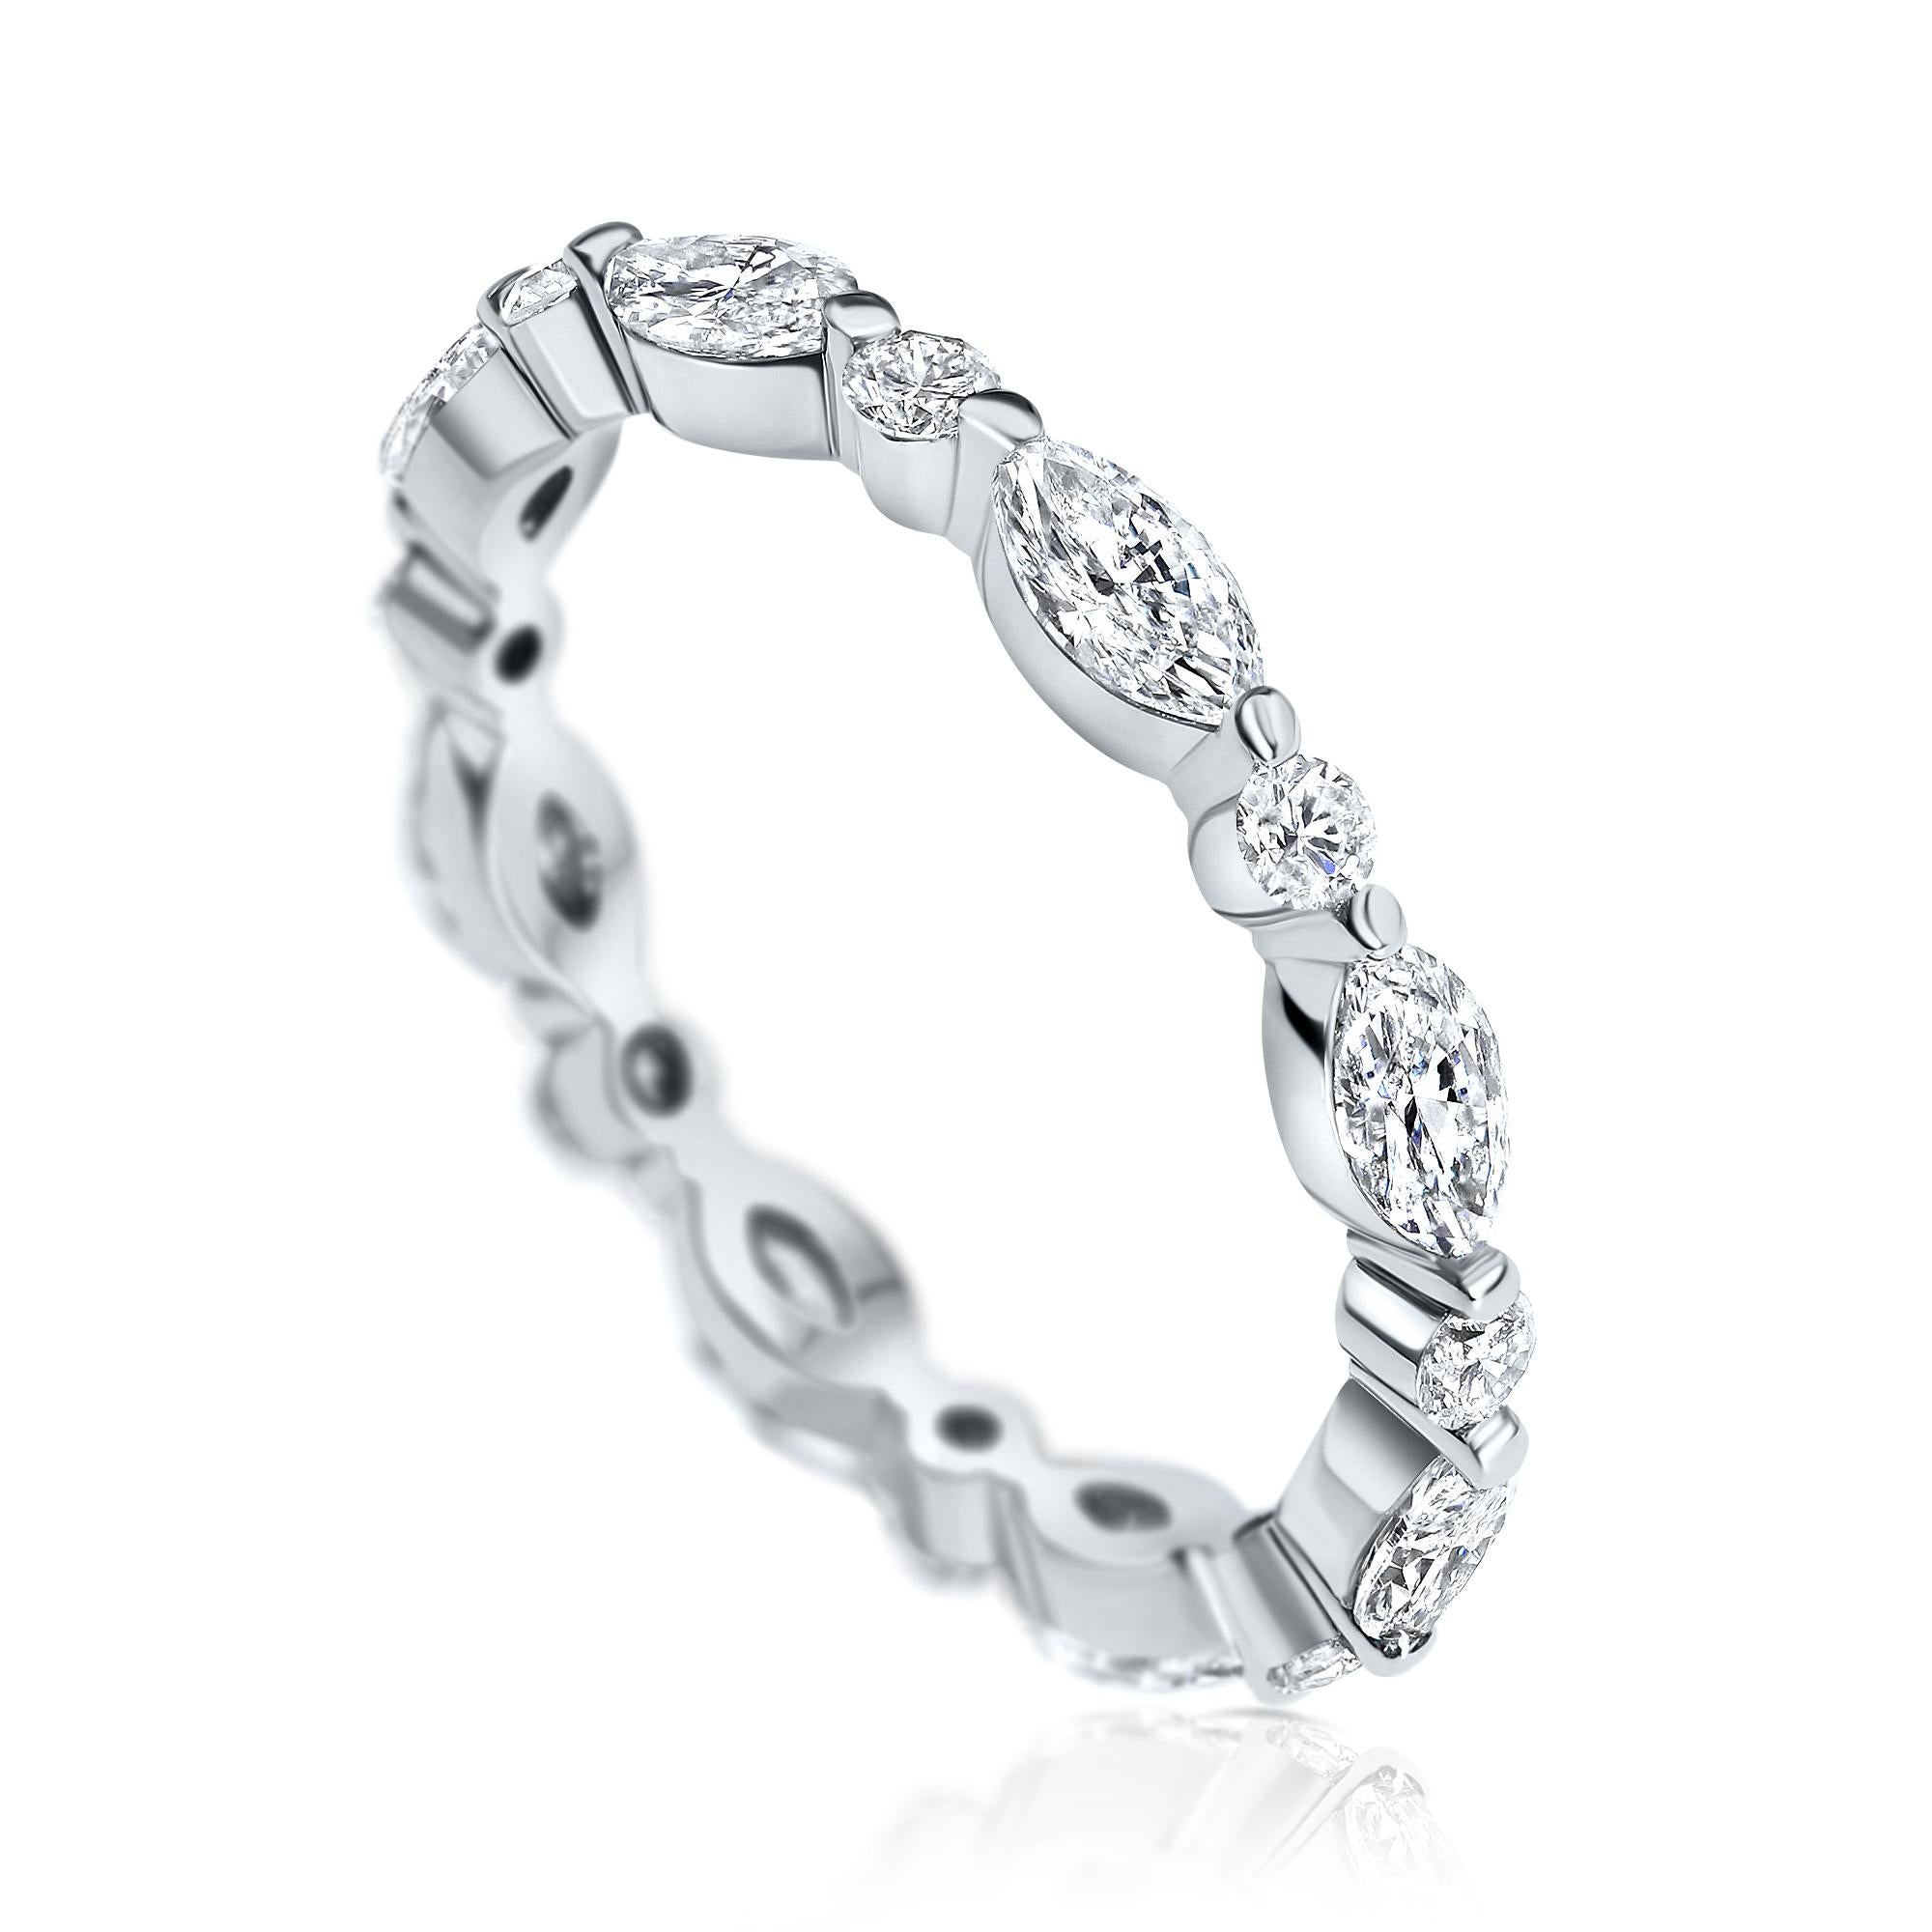 For Sale:  1.00 Carat Marquise & Round Cut Diamond Eternity Wedding Band in 14k White Gold 2